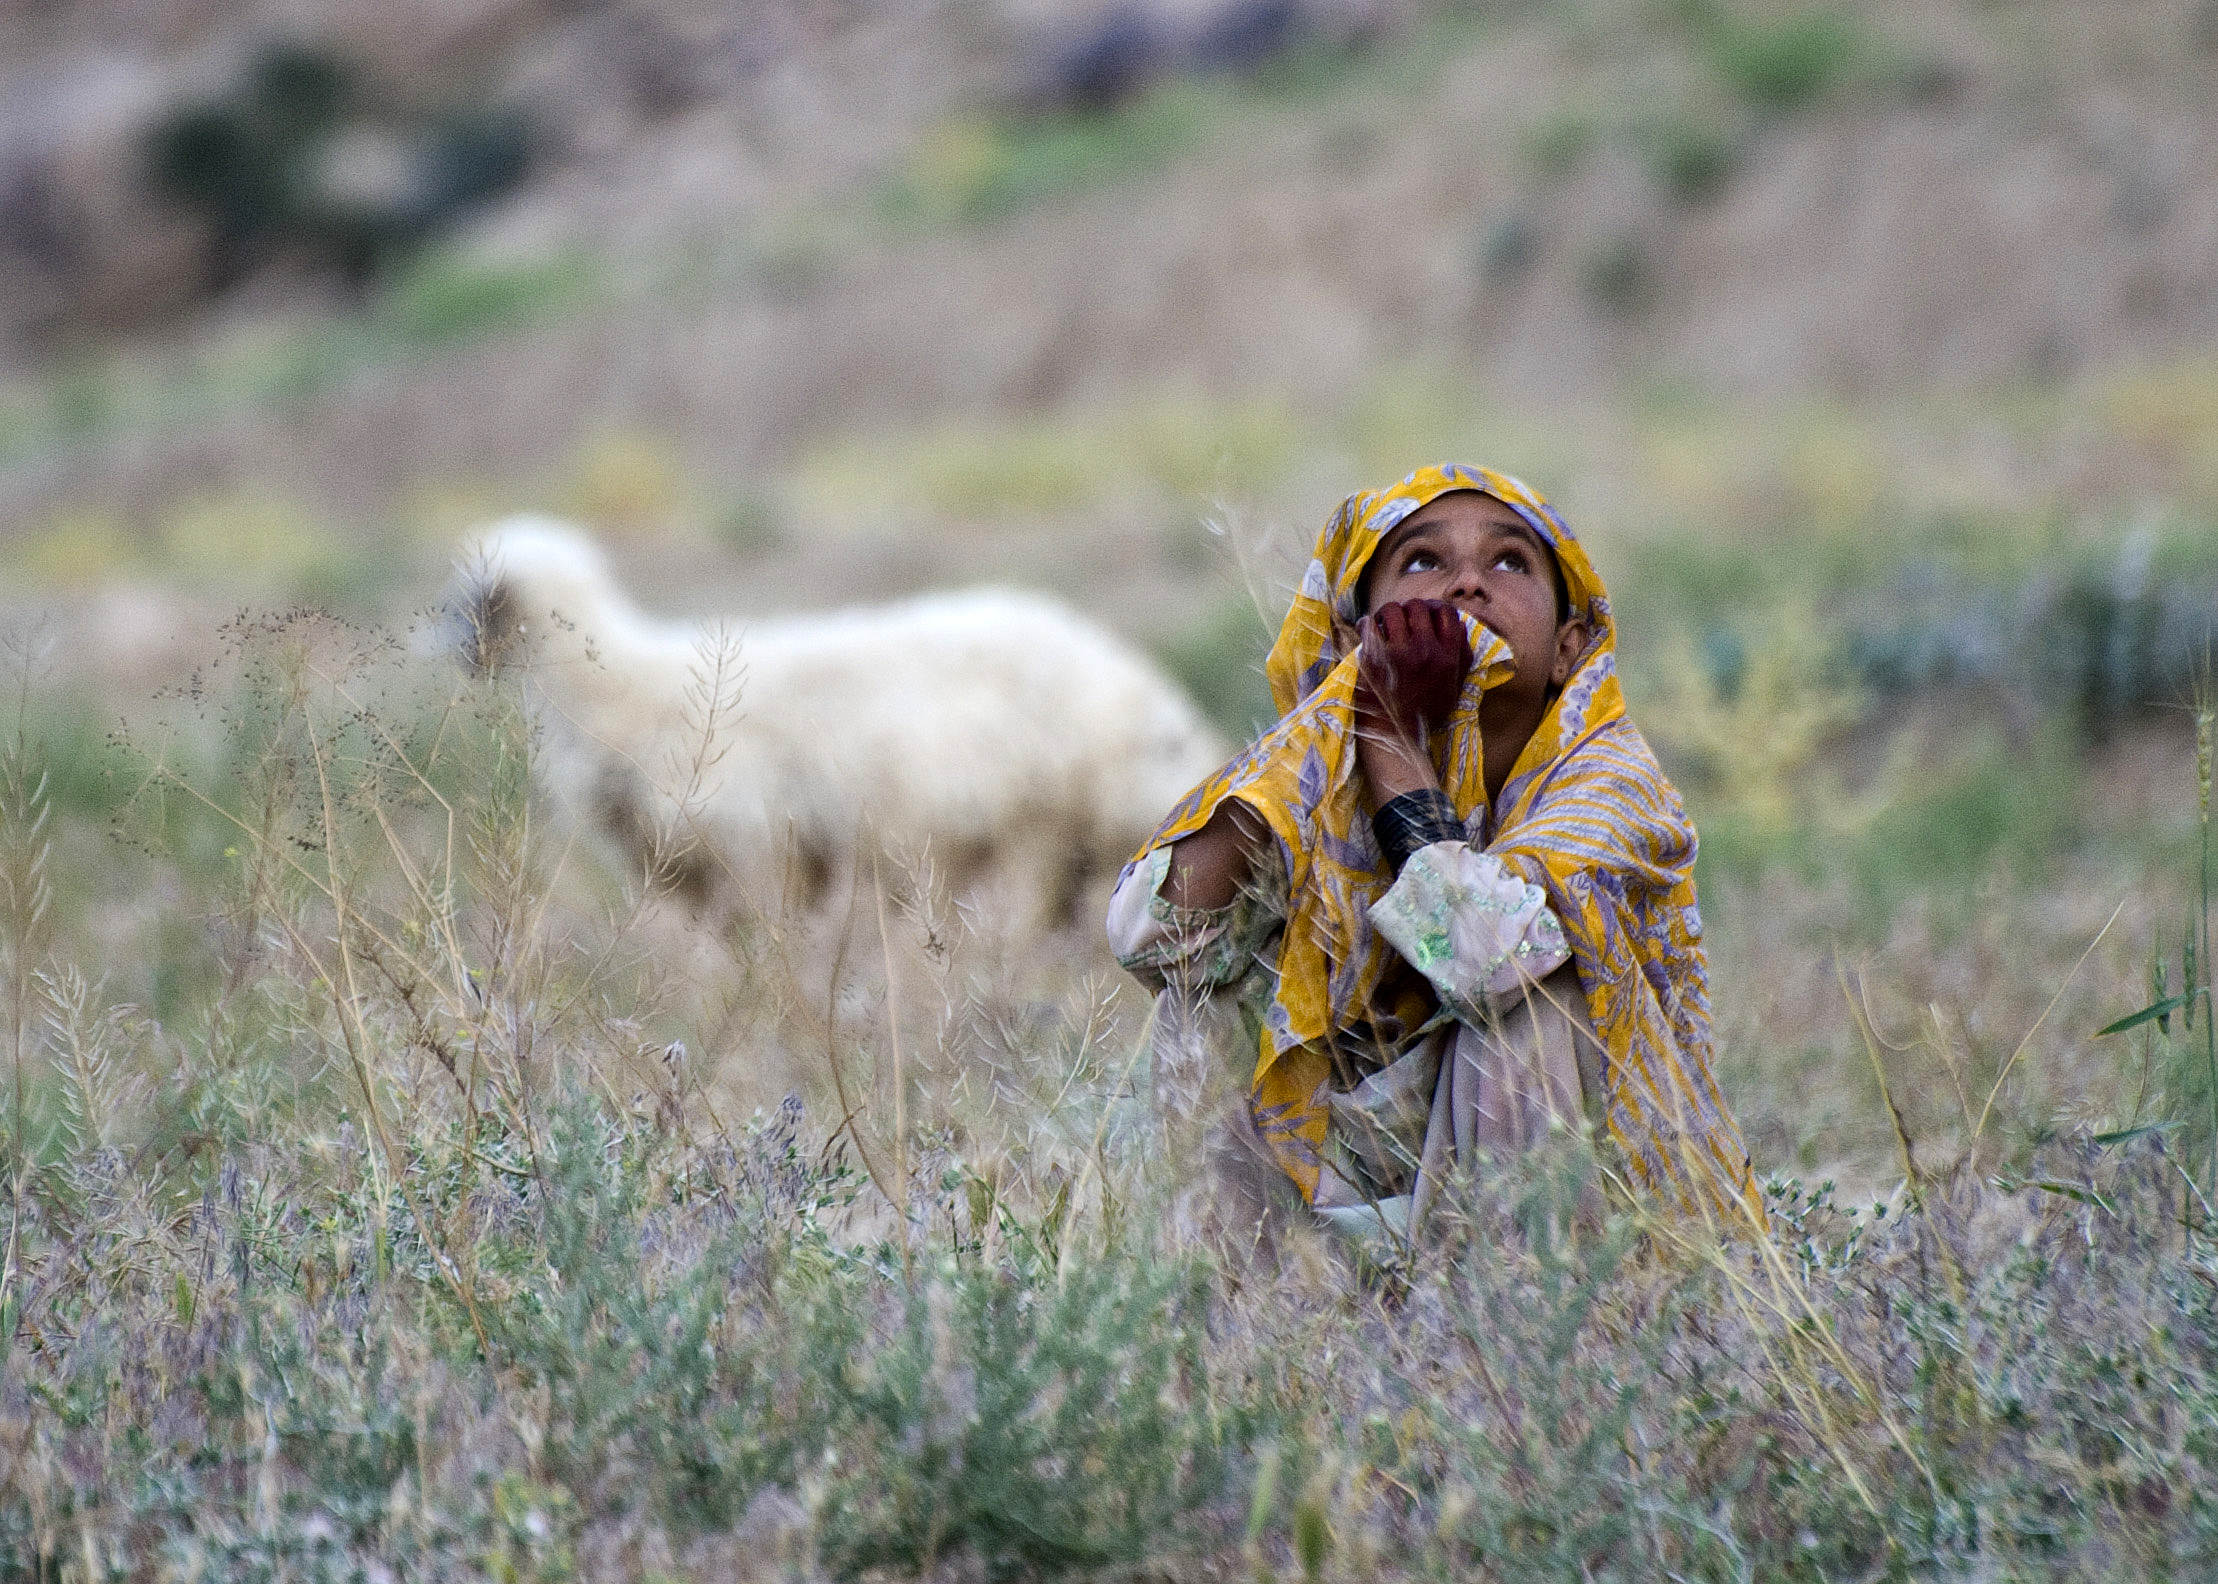 a woman with an old hand covering her mouth stands in a field with sheep